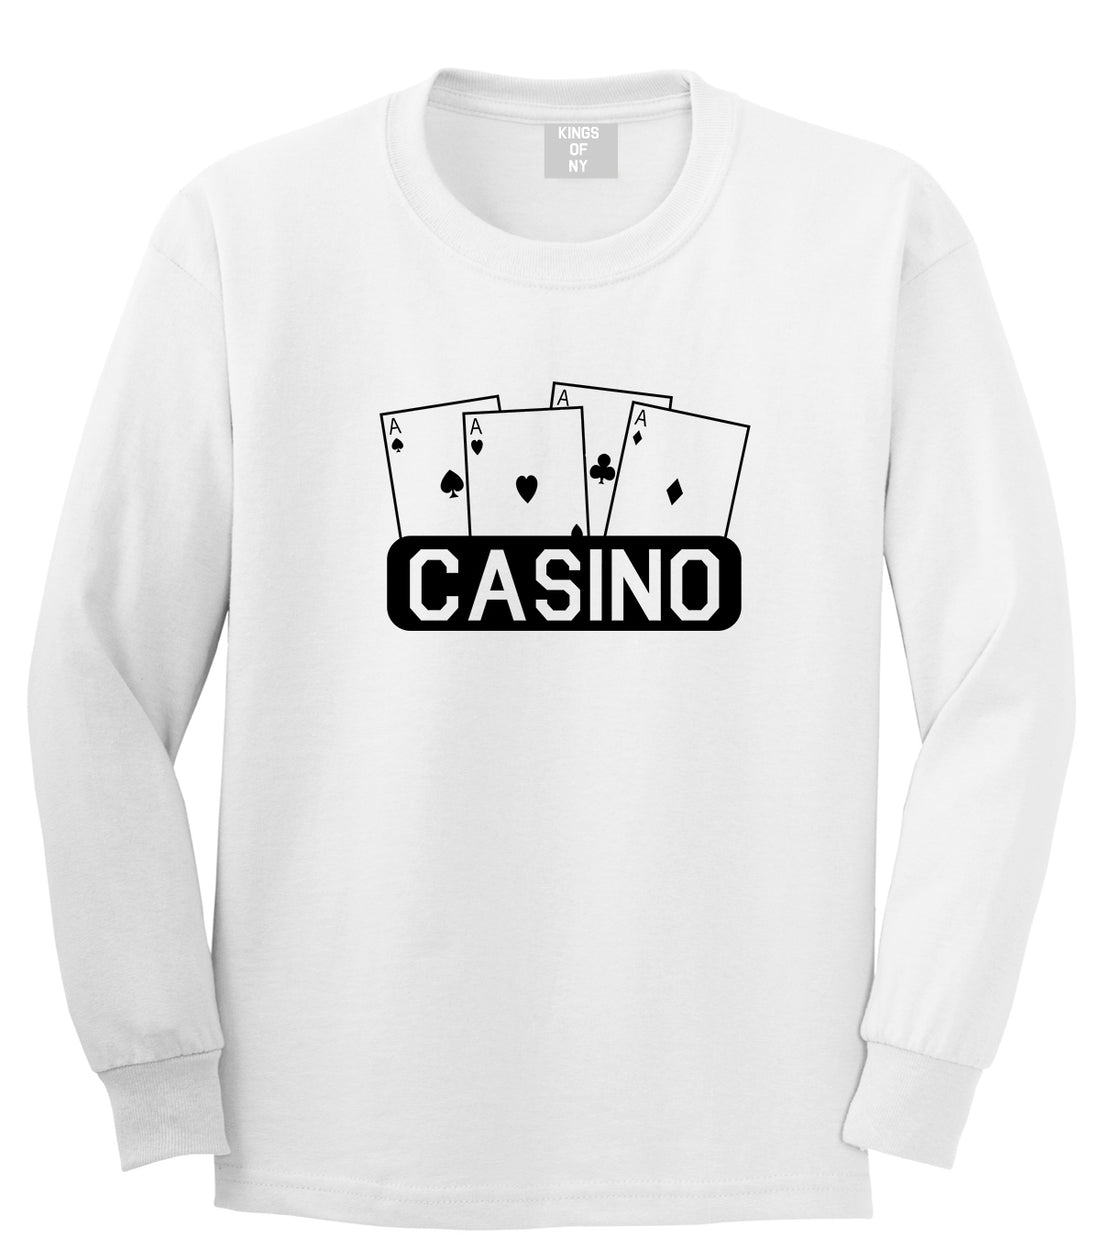 Casino Ace Cards White Long Sleeve T-Shirt by Kings Of NY